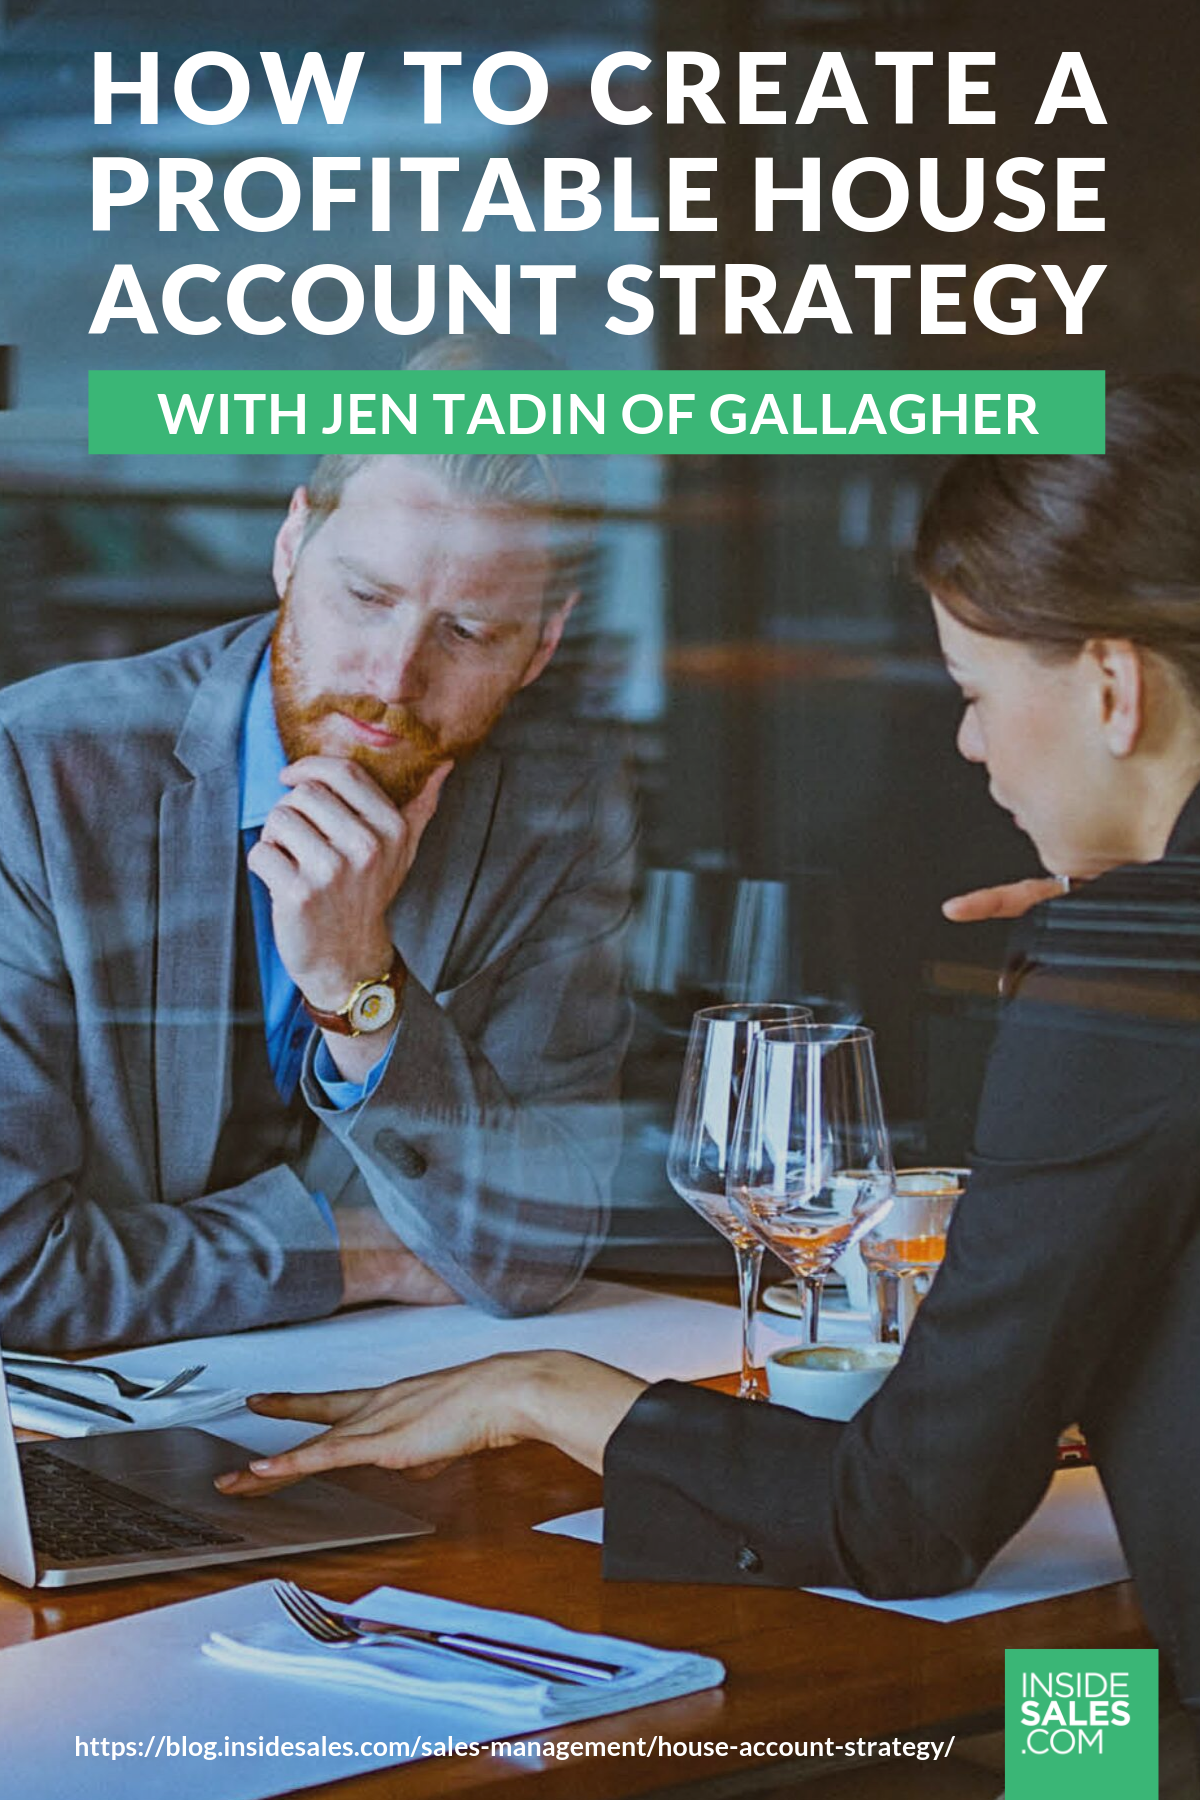 How To Create A Profitable House Account Strategy w/Jen Tadin @Gallagher https://www.insidesales.com/blog/sales-management/house-account-strategy/